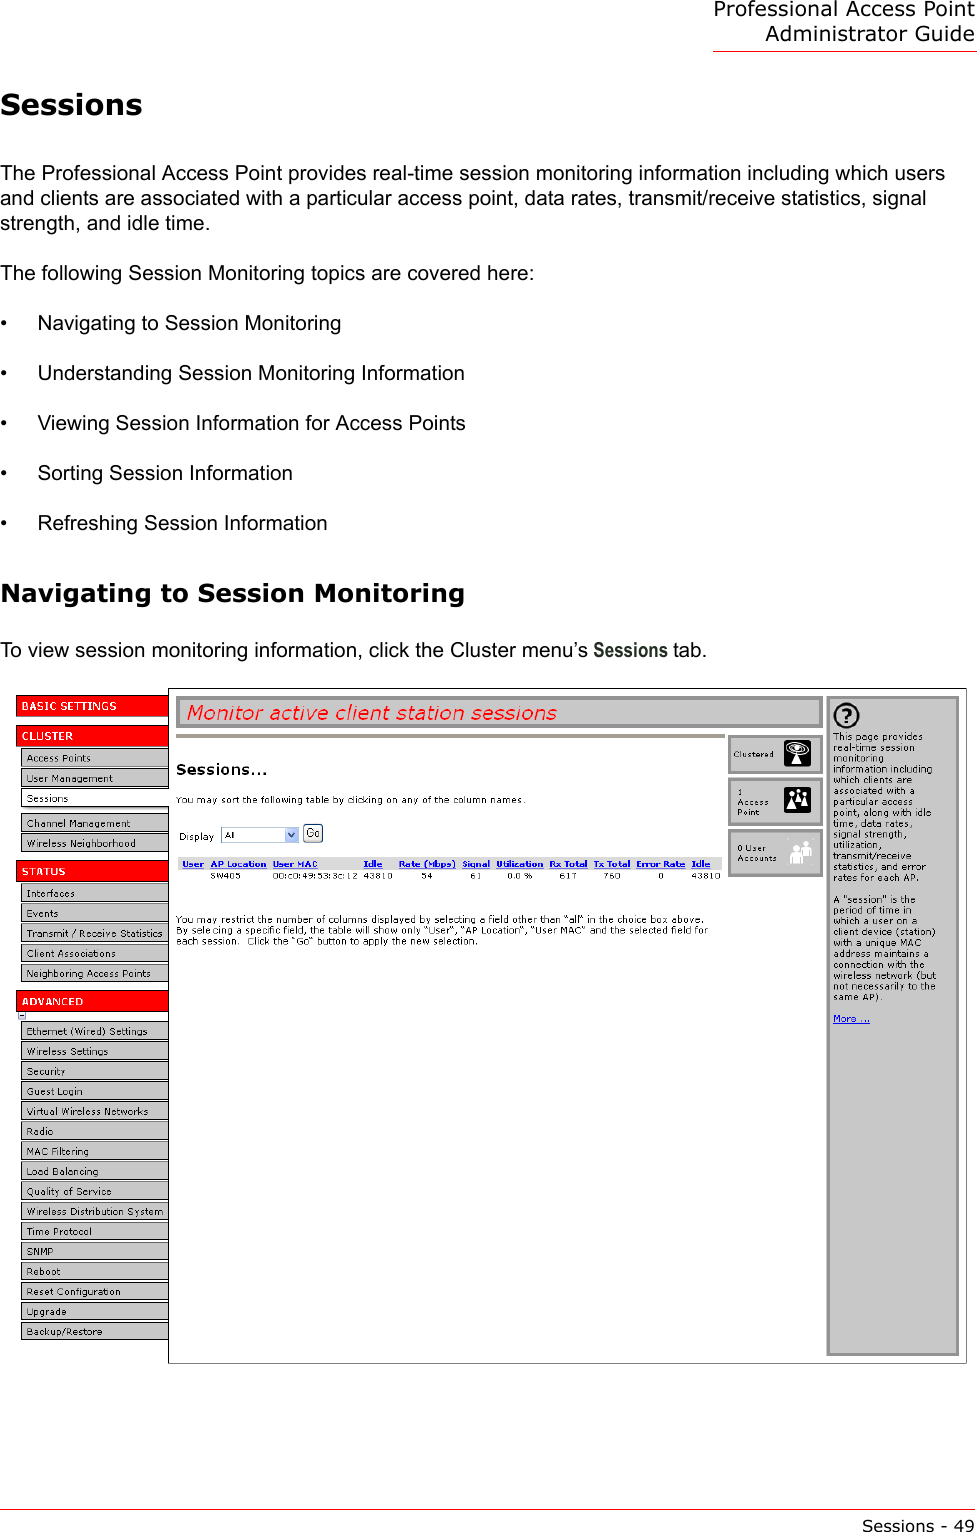 Professional Access Point Administrator GuideSessions - 49SessionsThe Professional Access Point provides real-time session monitoring information including which users and clients are associated with a particular access point, data rates, transmit/receive statistics, signal strength, and idle time.The following Session Monitoring topics are covered here:•Navigating to Session Monitoring•Understanding Session Monitoring Information•Viewing Session Information for Access Points•Sorting Session Information•Refreshing Session InformationNavigating to Session MonitoringTo view session monitoring information, click the Cluster menu’s Sessions tab.